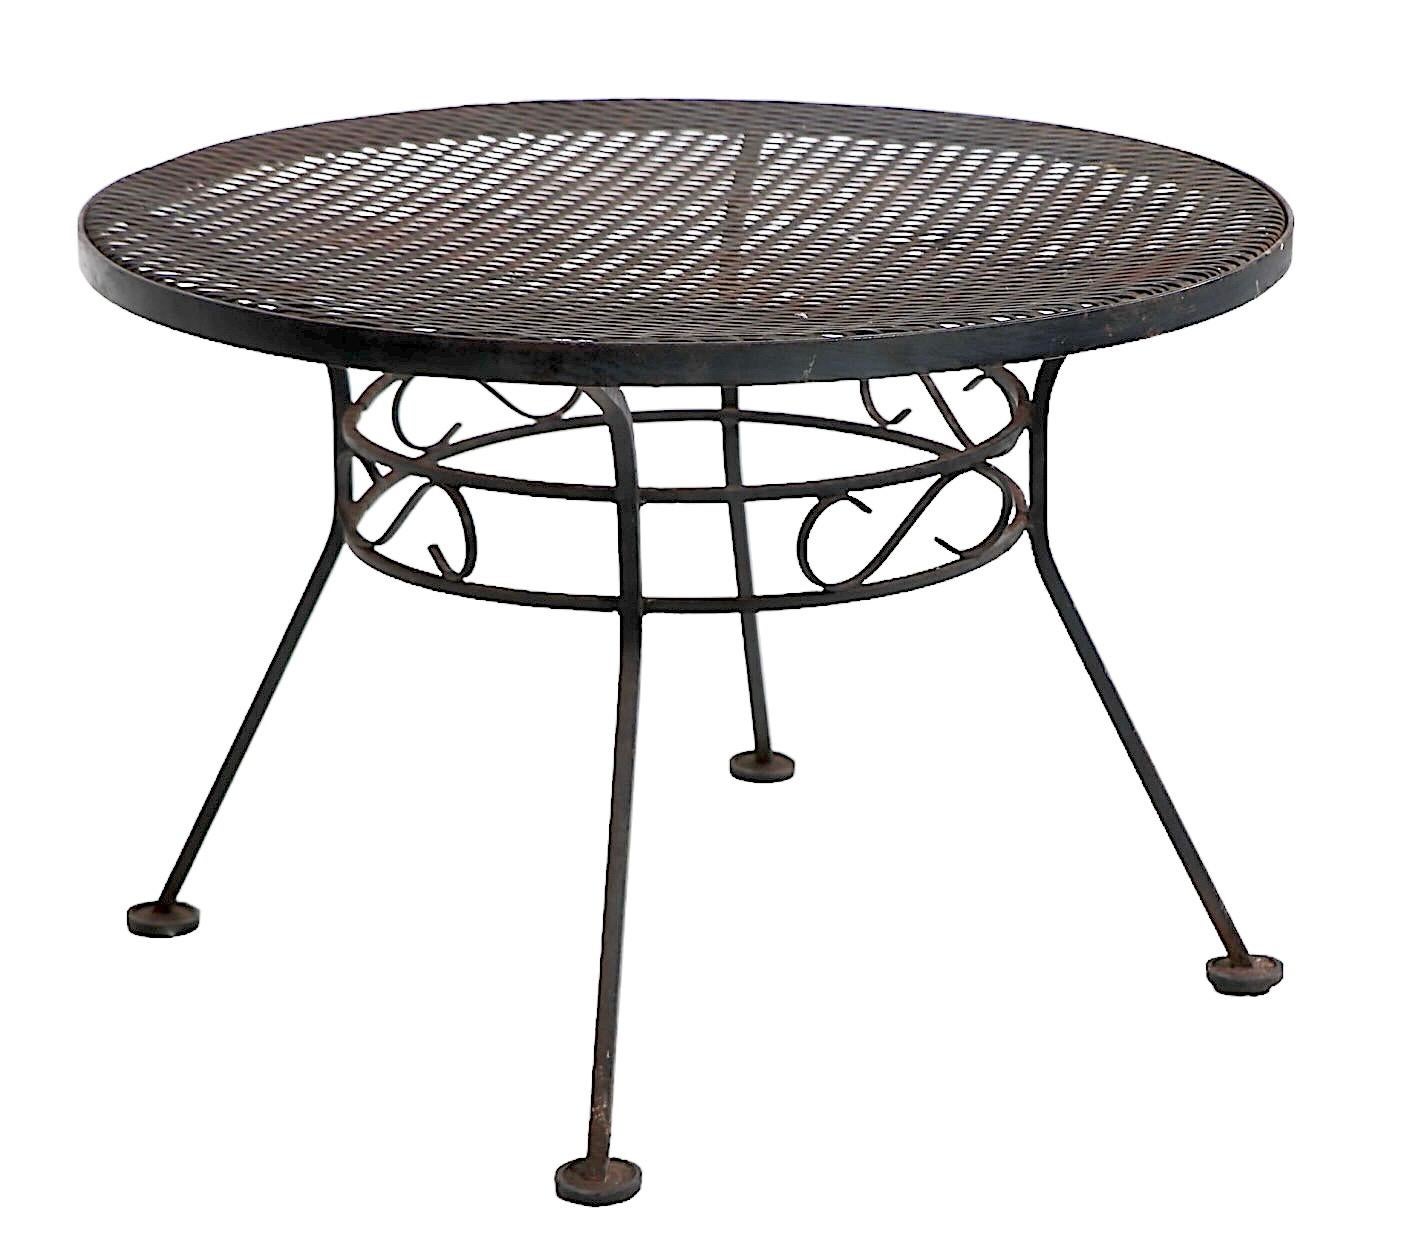 Diminutive wrought iron, metal mesh side table by Woodard Furniture, circa 1940/60's. The table is in very good, clean, original and ready to use condition, showing only light cosmetic wear,  normal and consistent with age. 
 Please view our entire